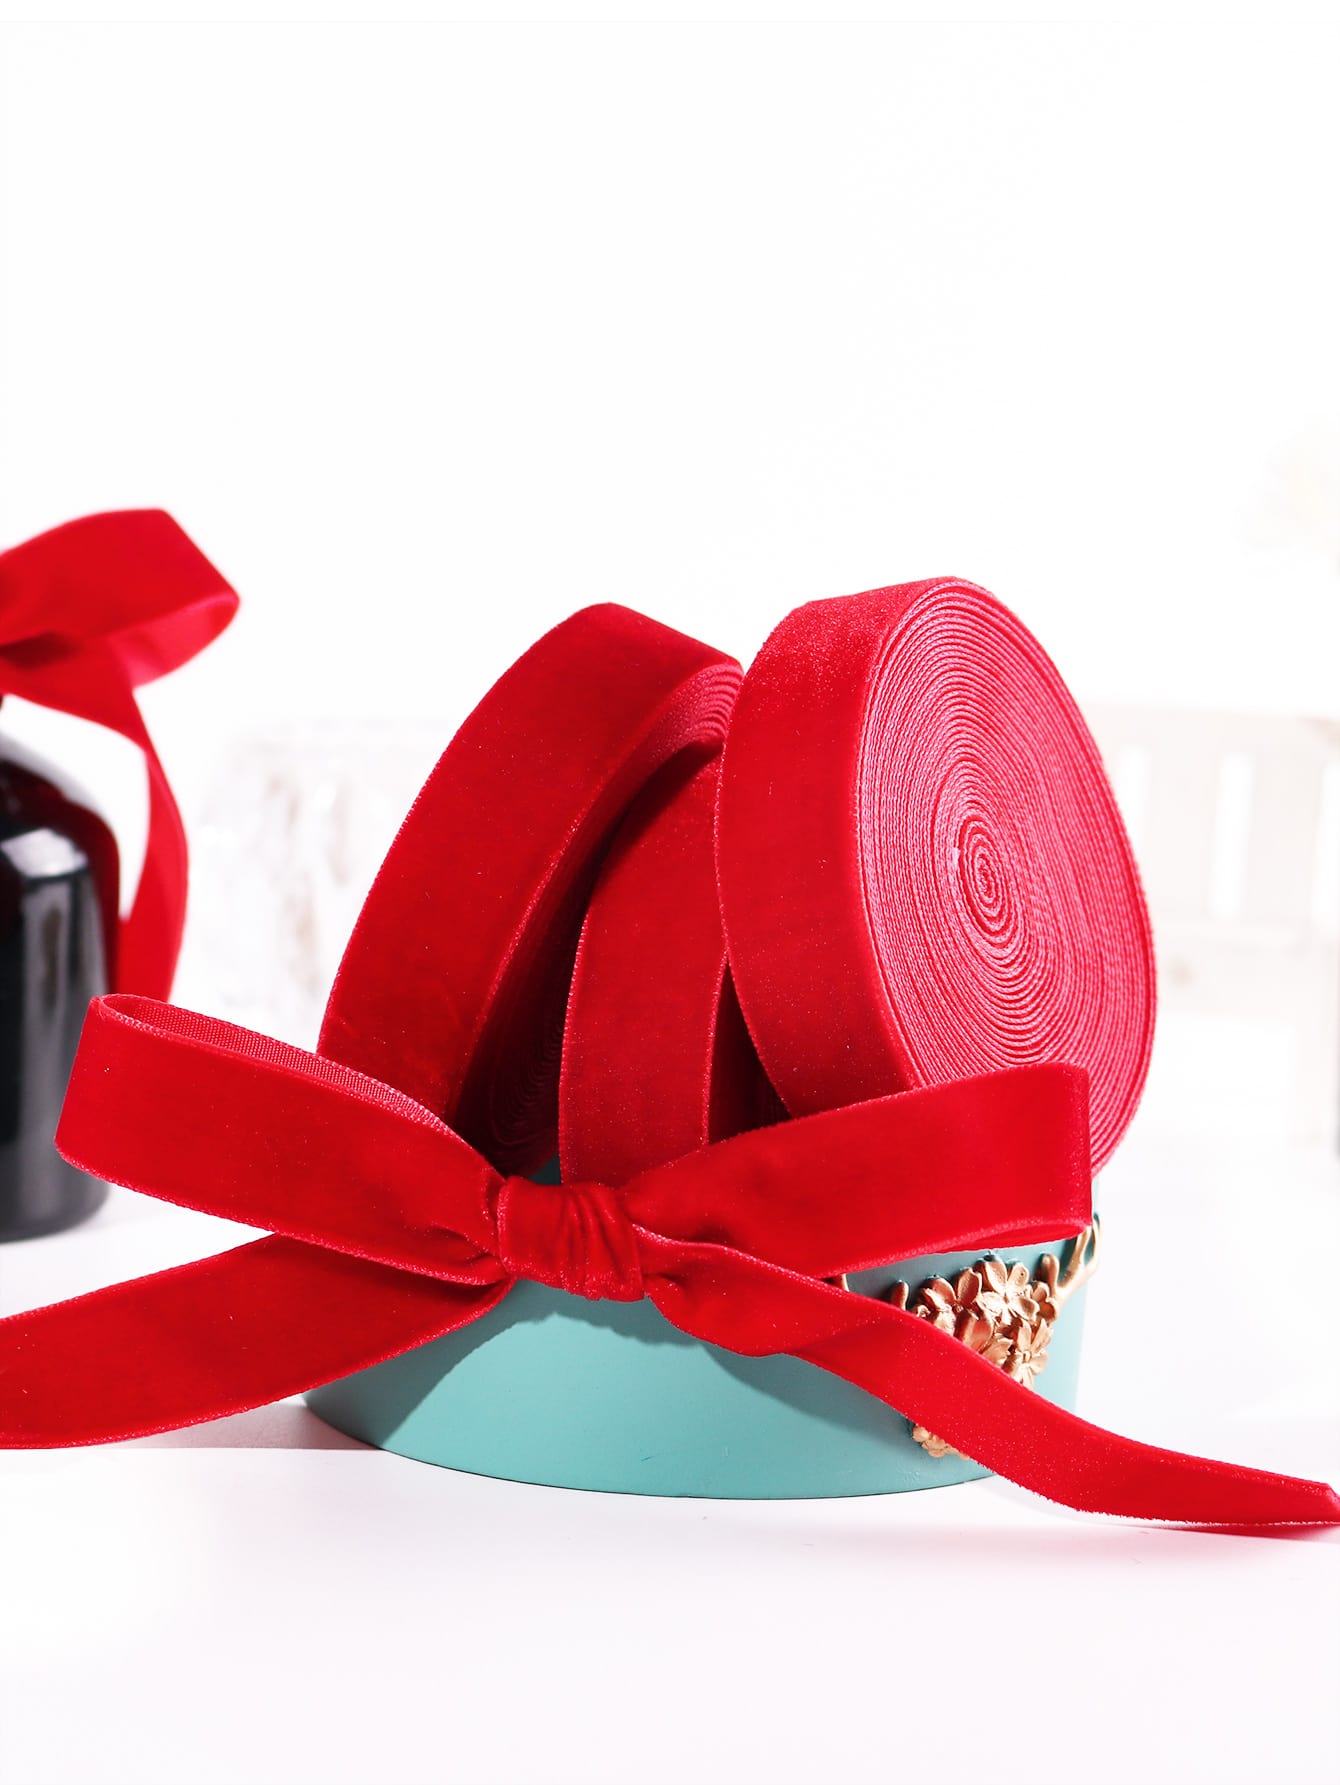 1roll Plain Gift Wrapping Ribbon